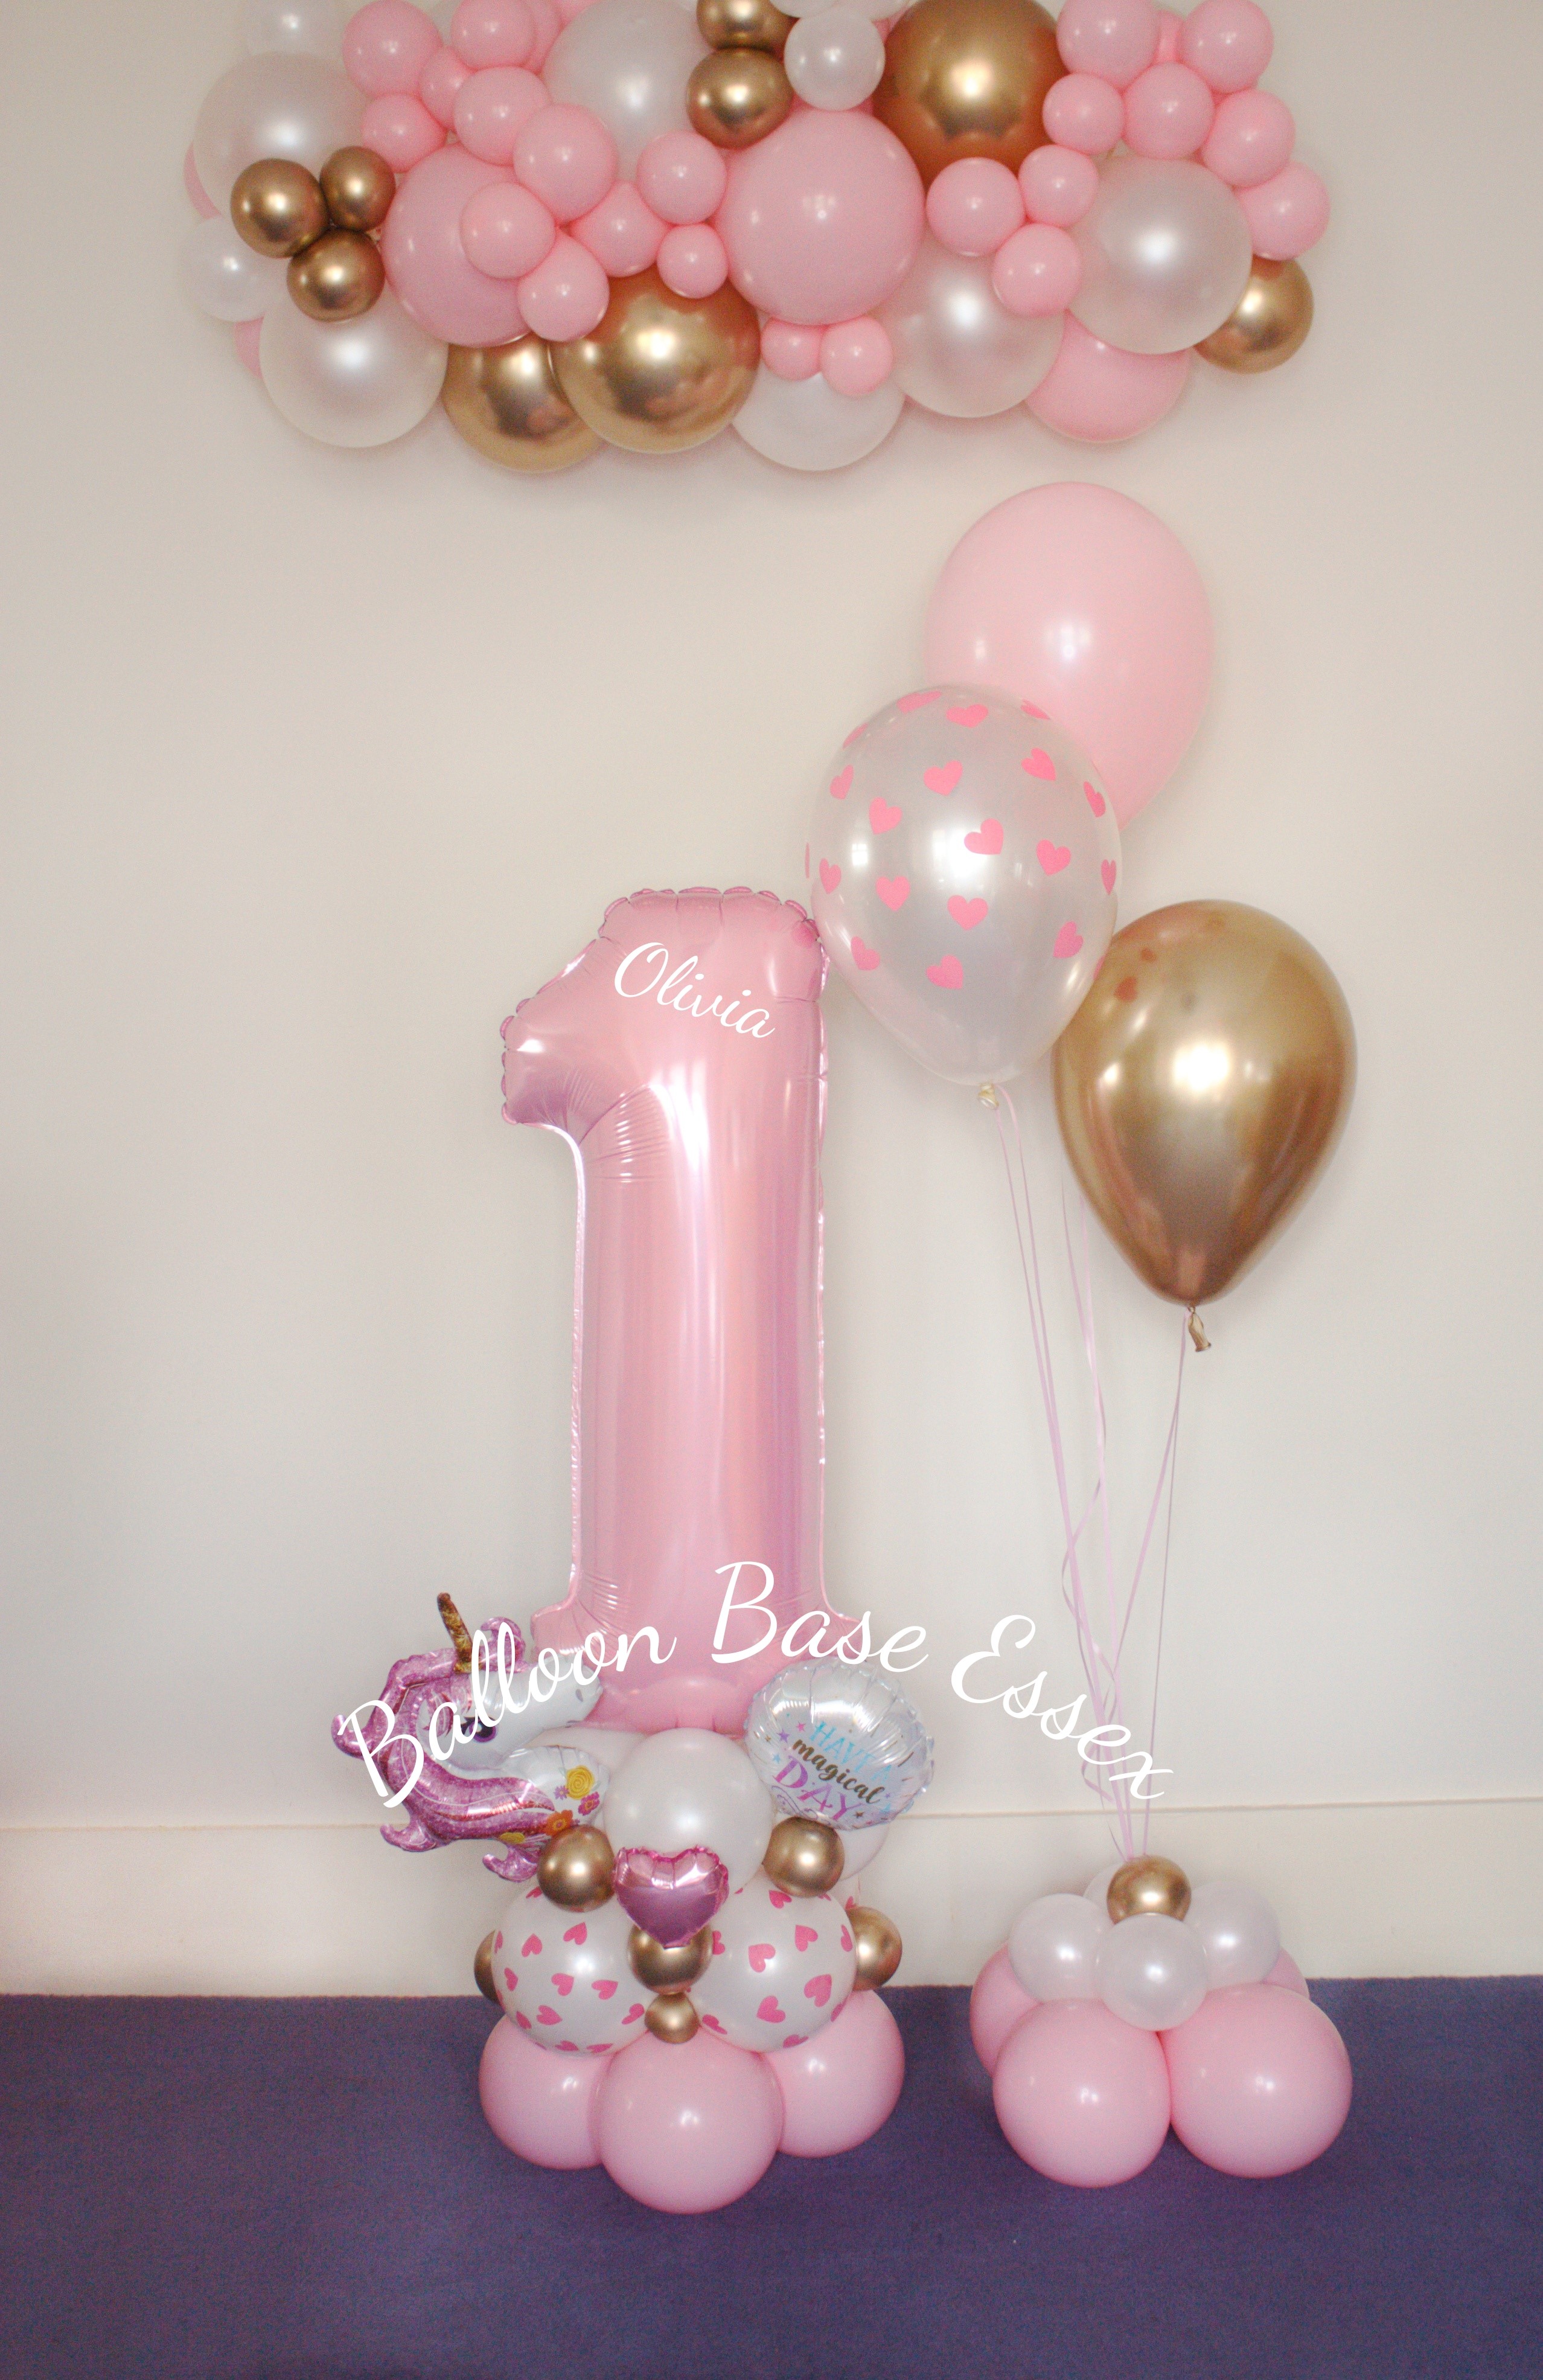 Pastel pink number 1 balloon stack with 3 helium balloons and balloon garland hanging above